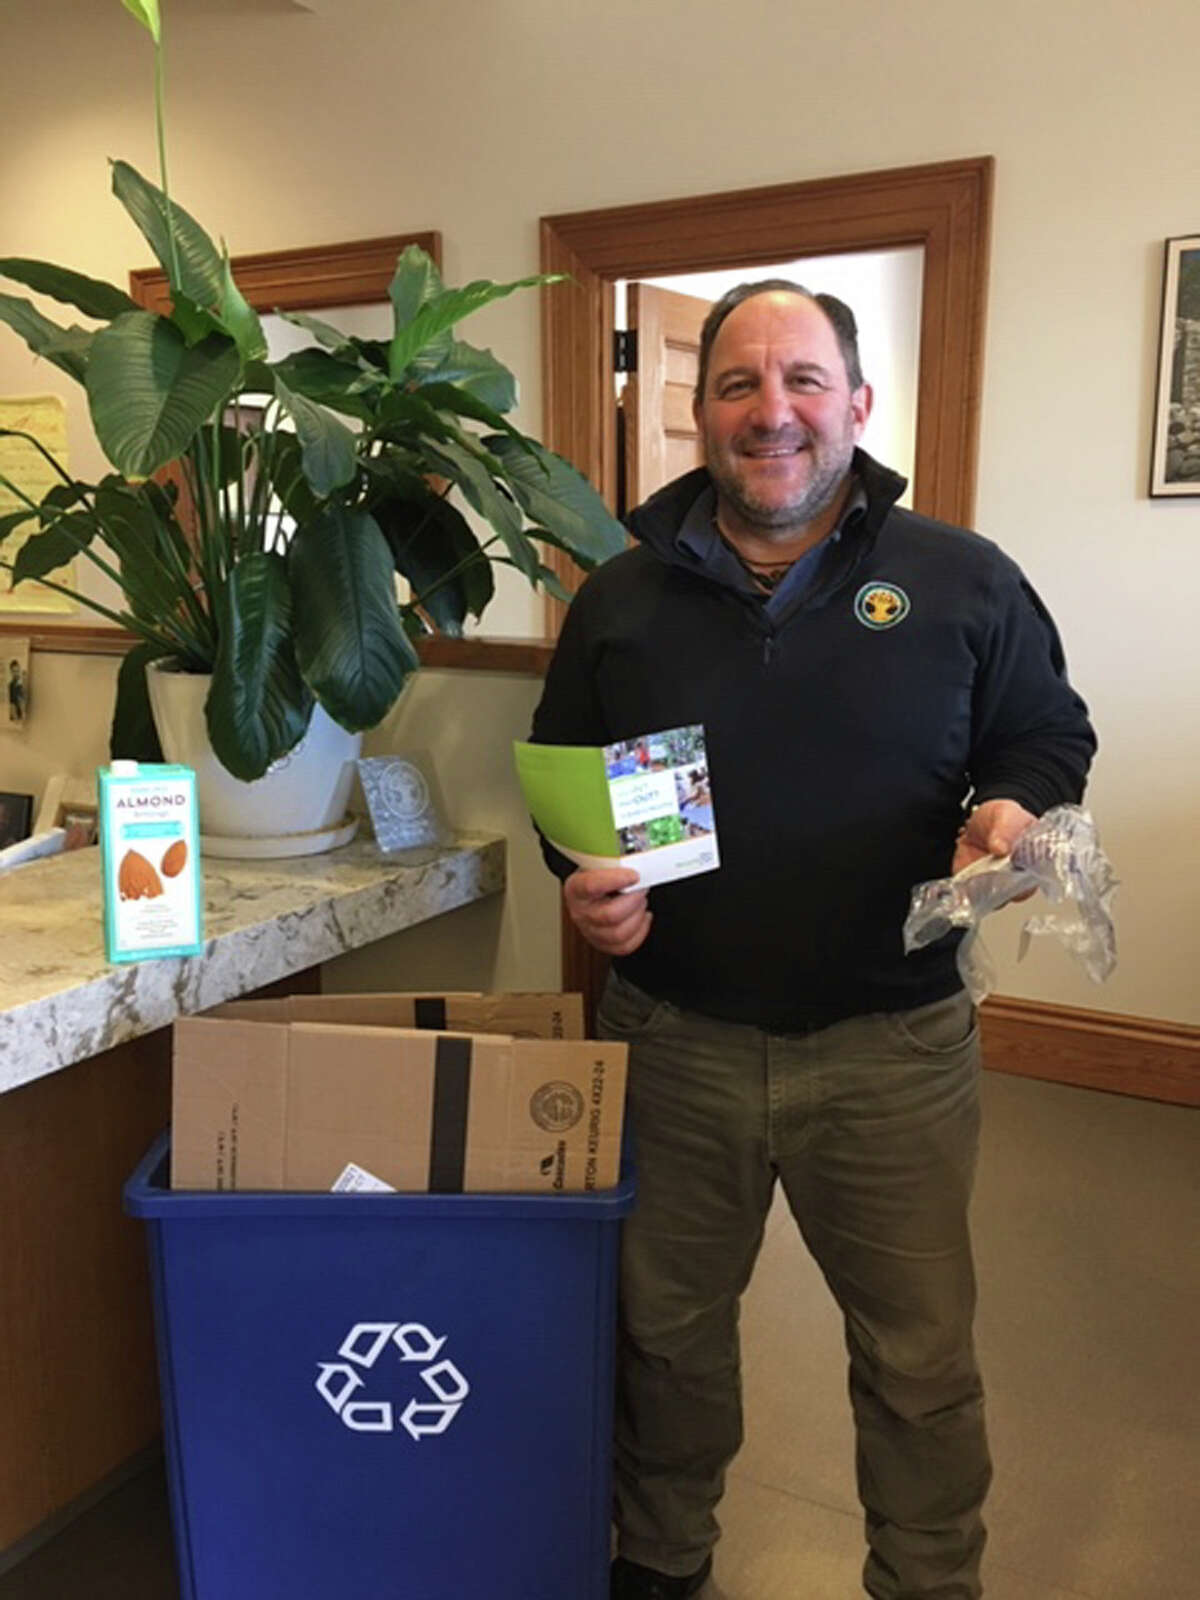 Tiger Mann, New Canaan's director of Public Works presented Recycling 101: What's In, What's Out, and Why, in April, 2019, at the New Canaan Library. Contributed photo